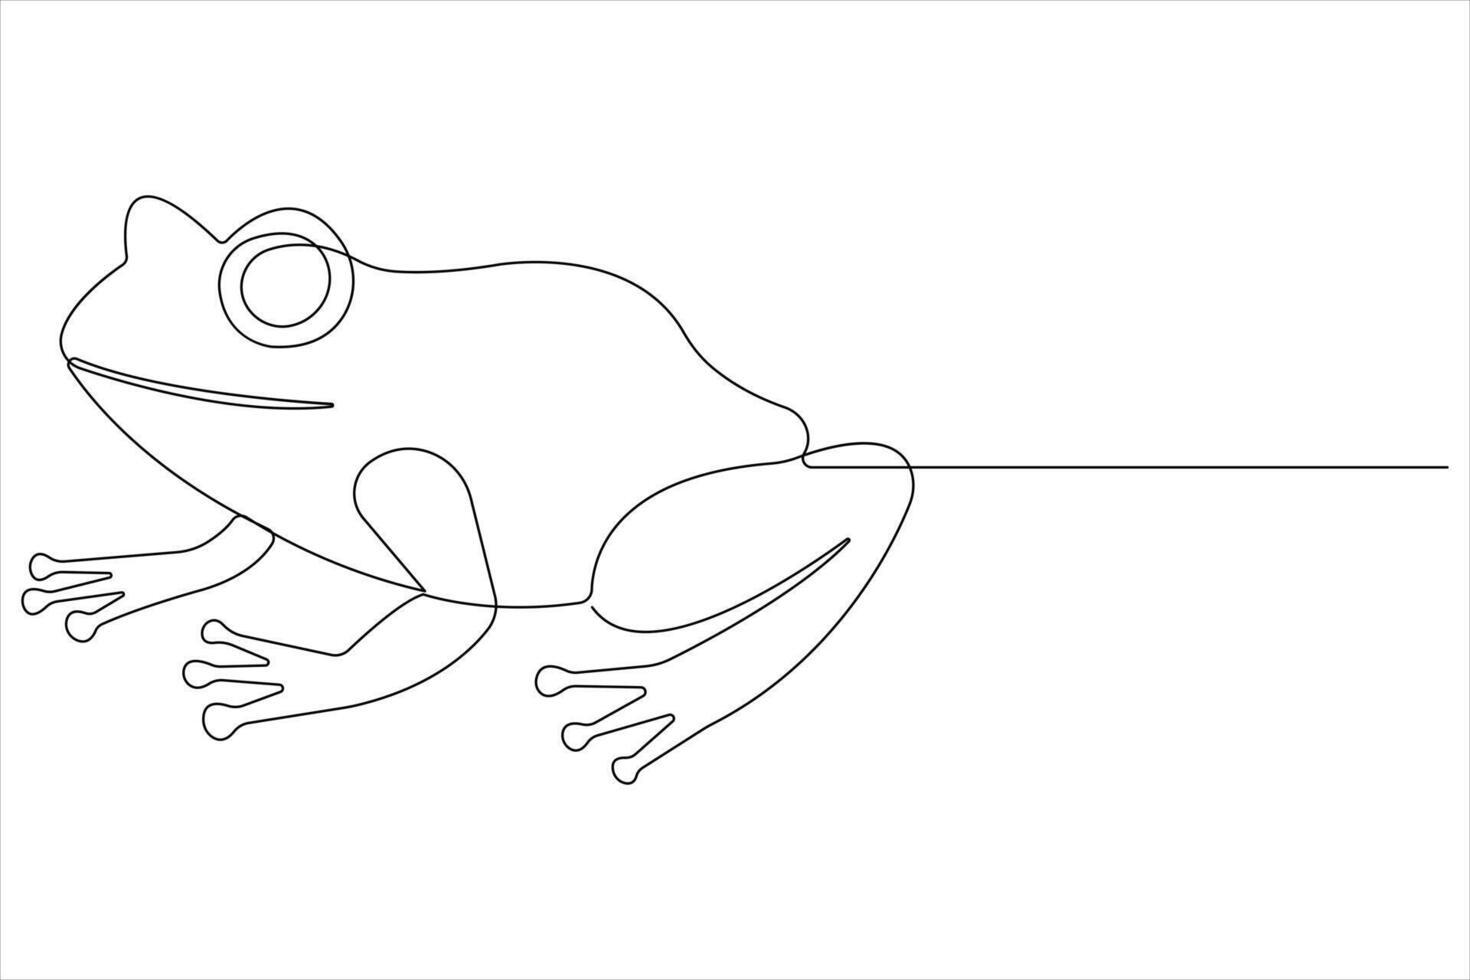 Frog symbol illustration of world animal day continuous one line art vector